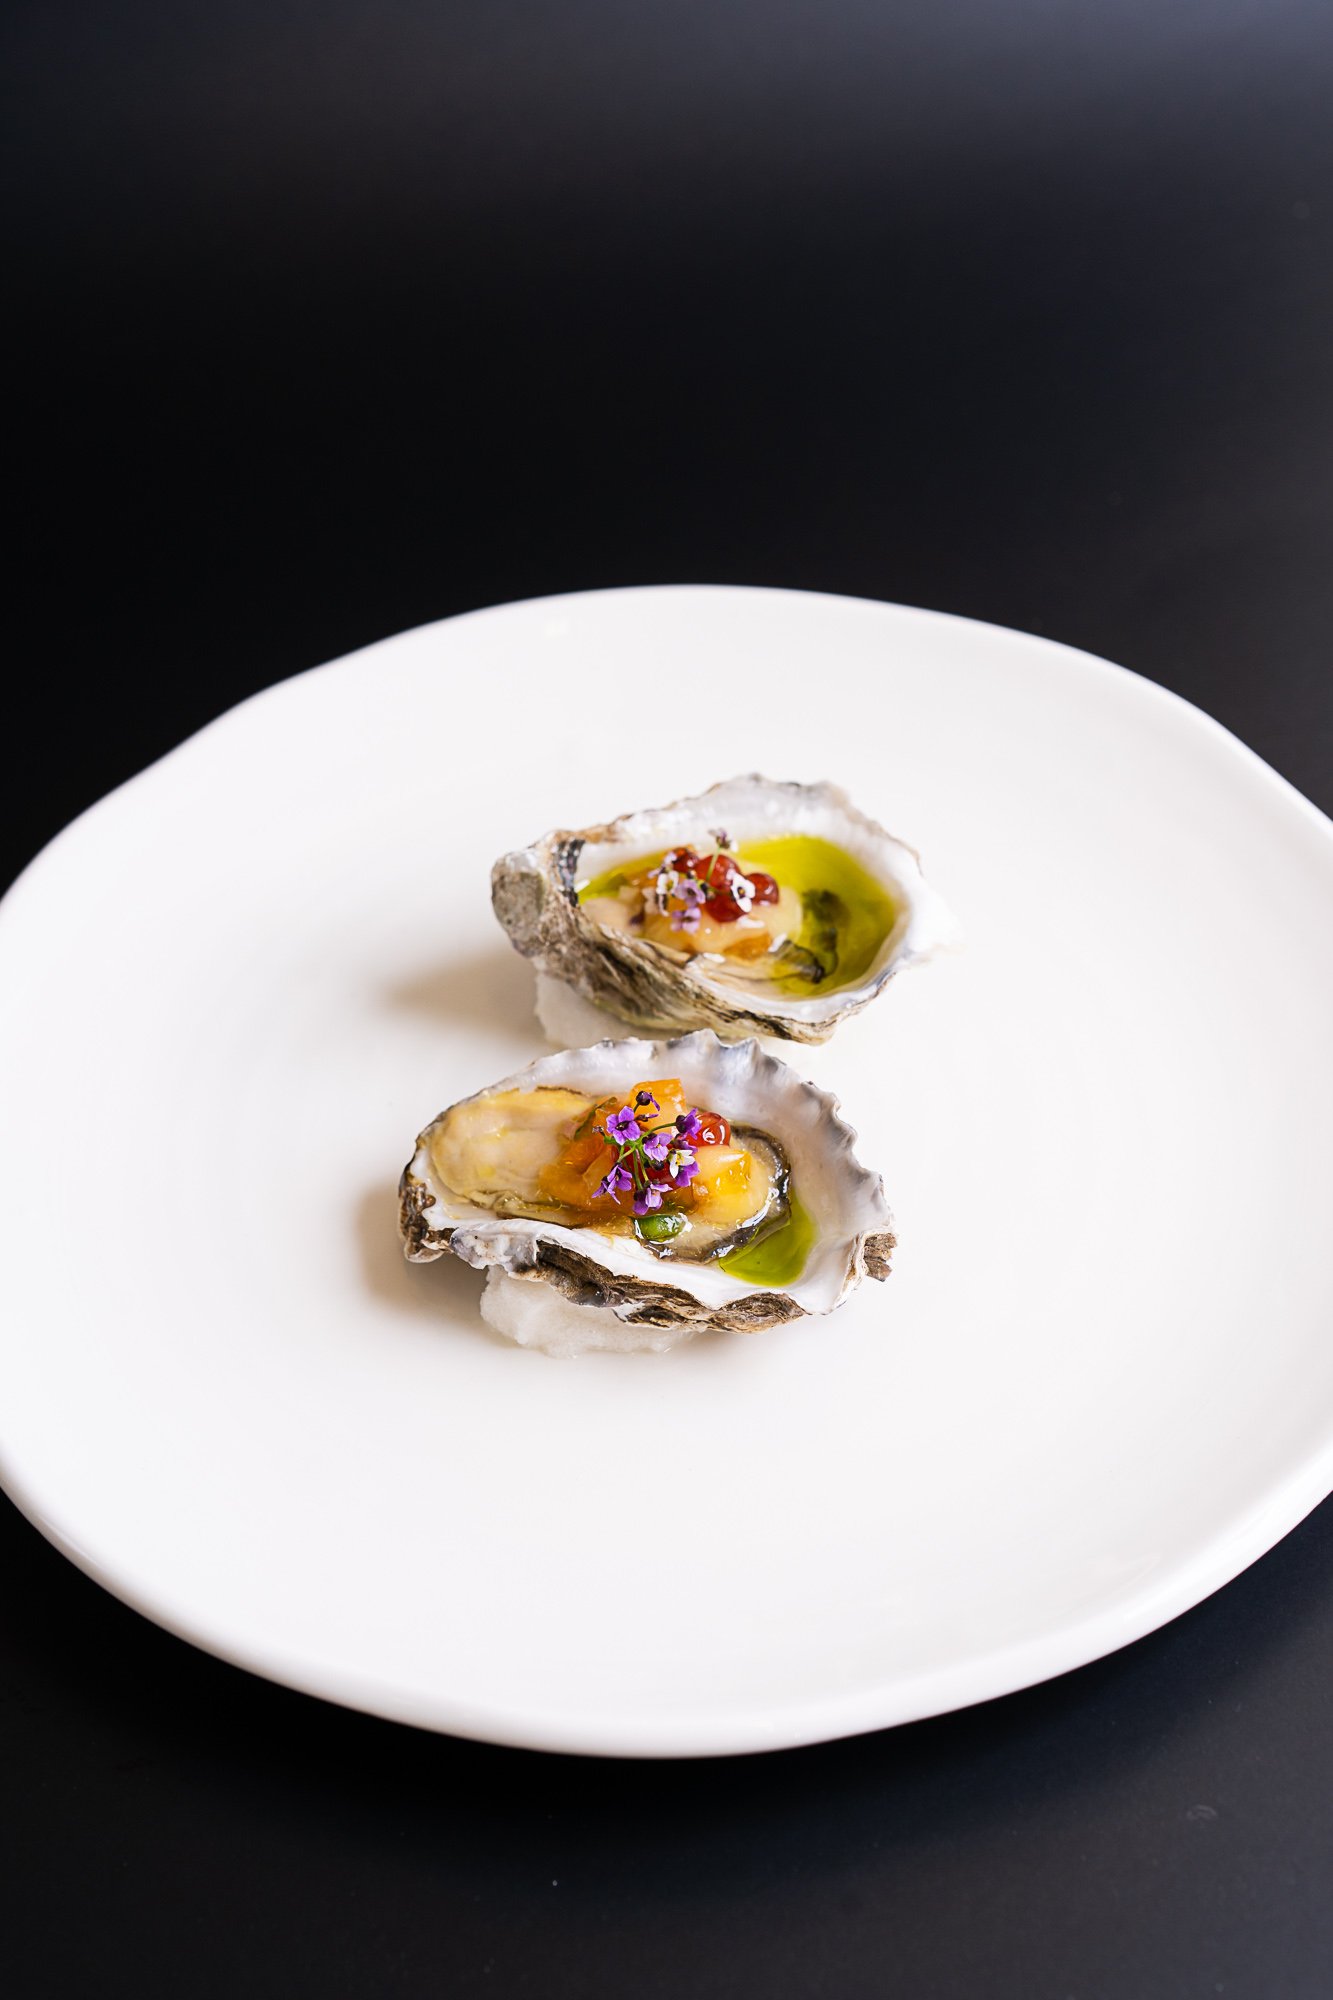 Ostrica con mela - oysters with persimmon, chili and avruga caviar, LBP&S, 7th July 2022.jpg